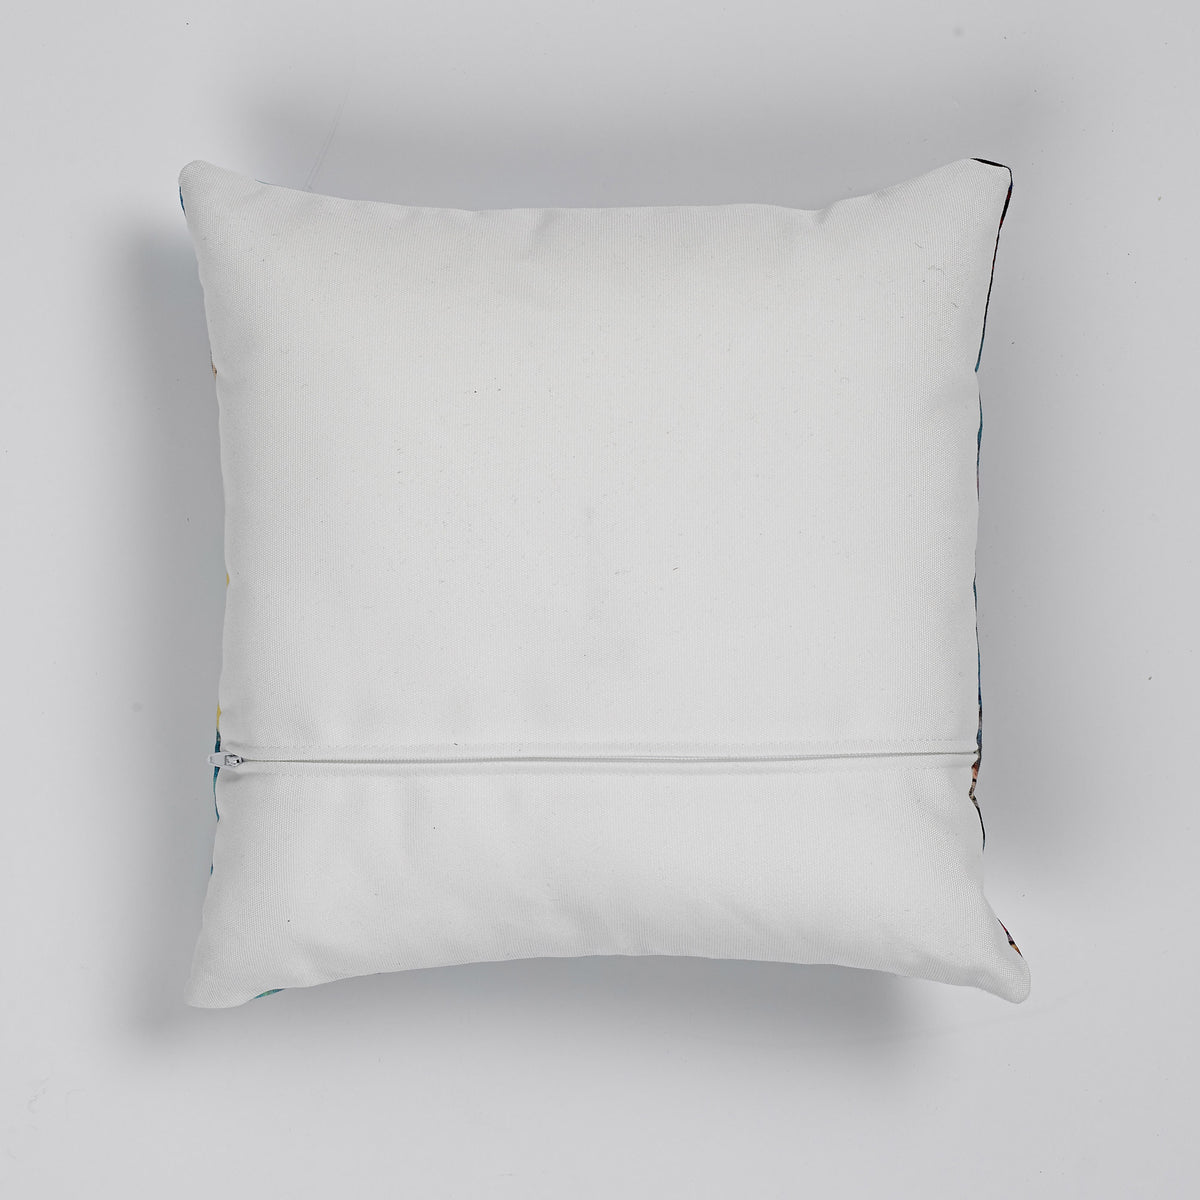 Kingfisher cushion by Fox and Boo, Linen reverse